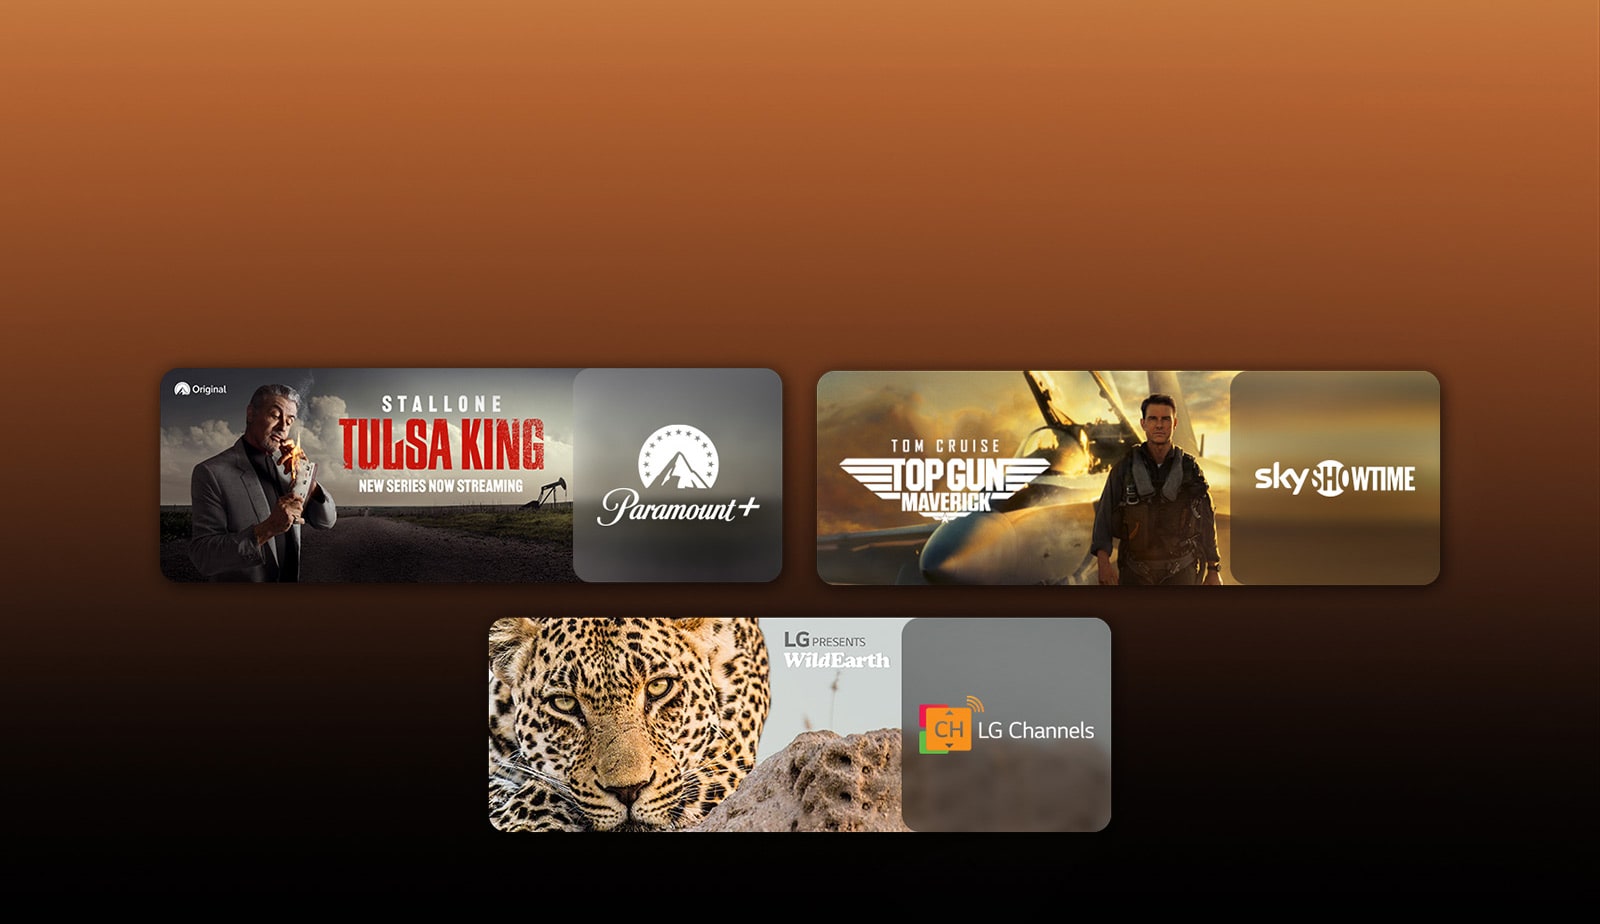 There are logos of streaming service platforms and matching footages right next to each logo. There are images of  Paramount+'s Tulsa King, sky showtime's TOP GUN, and LG CHANNELS' leopard.